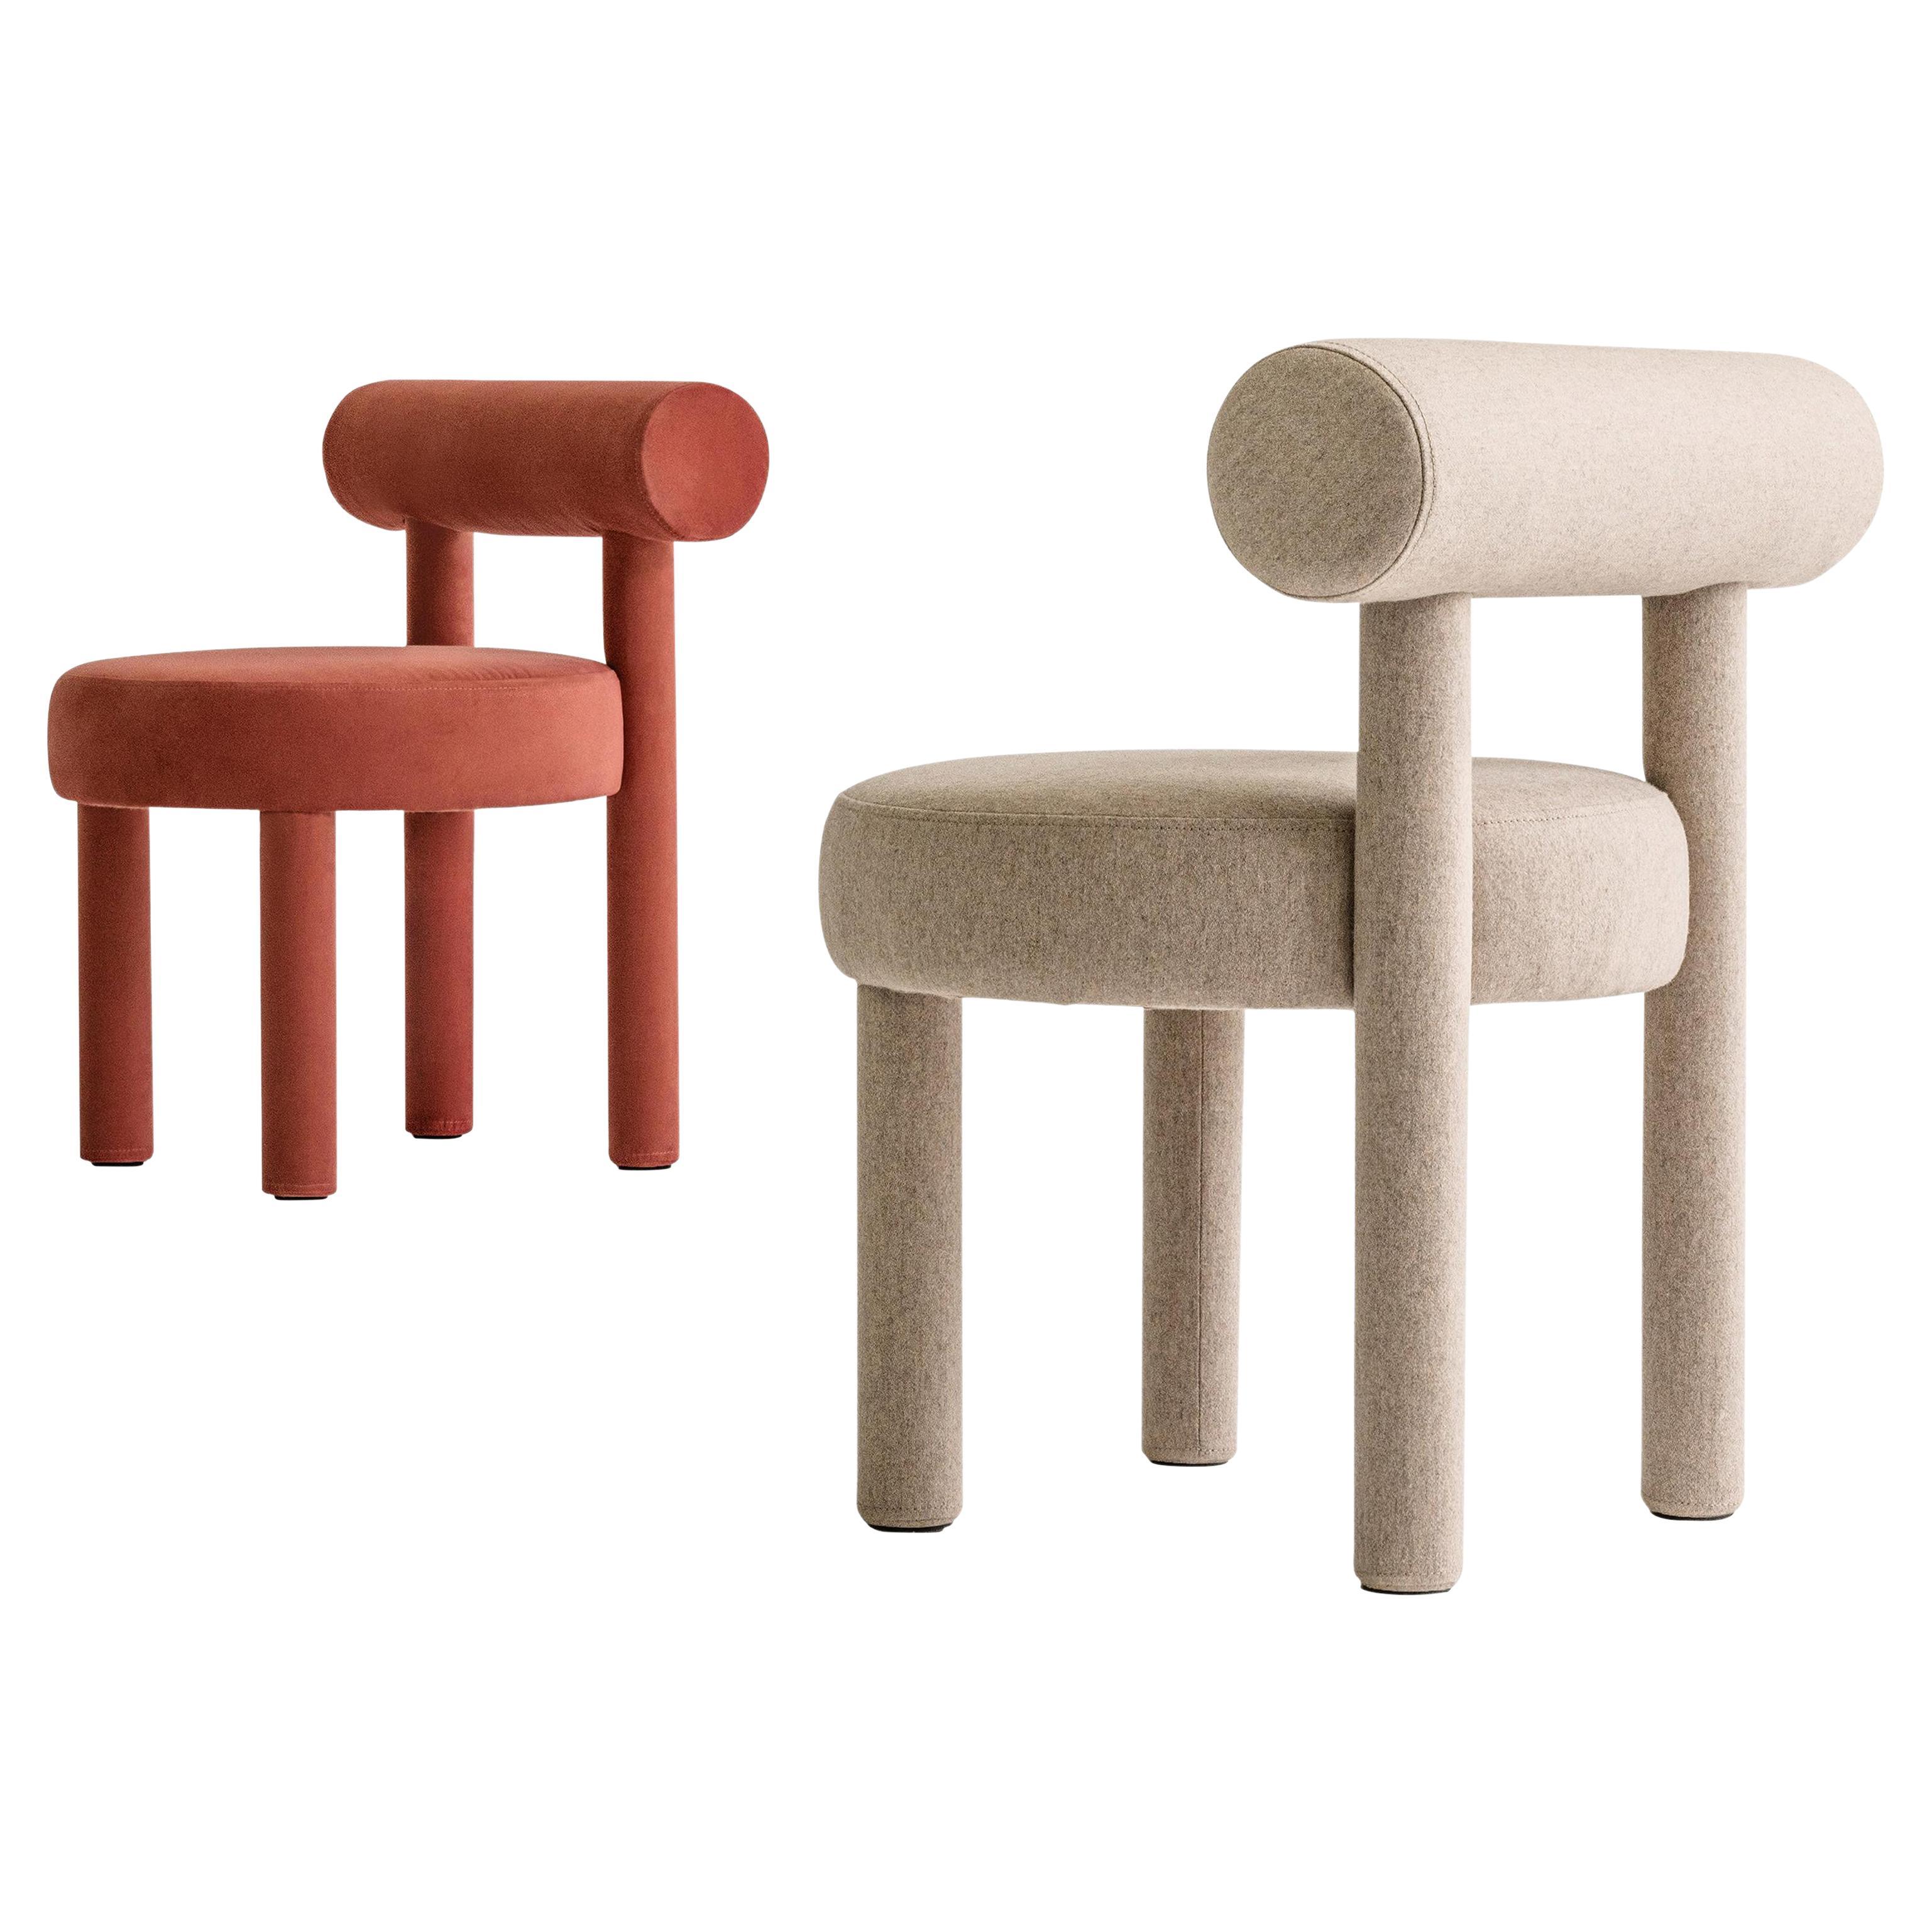 Set of Two Contemporary Dining Chairs 'Gropius CS1' by Noom, Orange and White For Sale